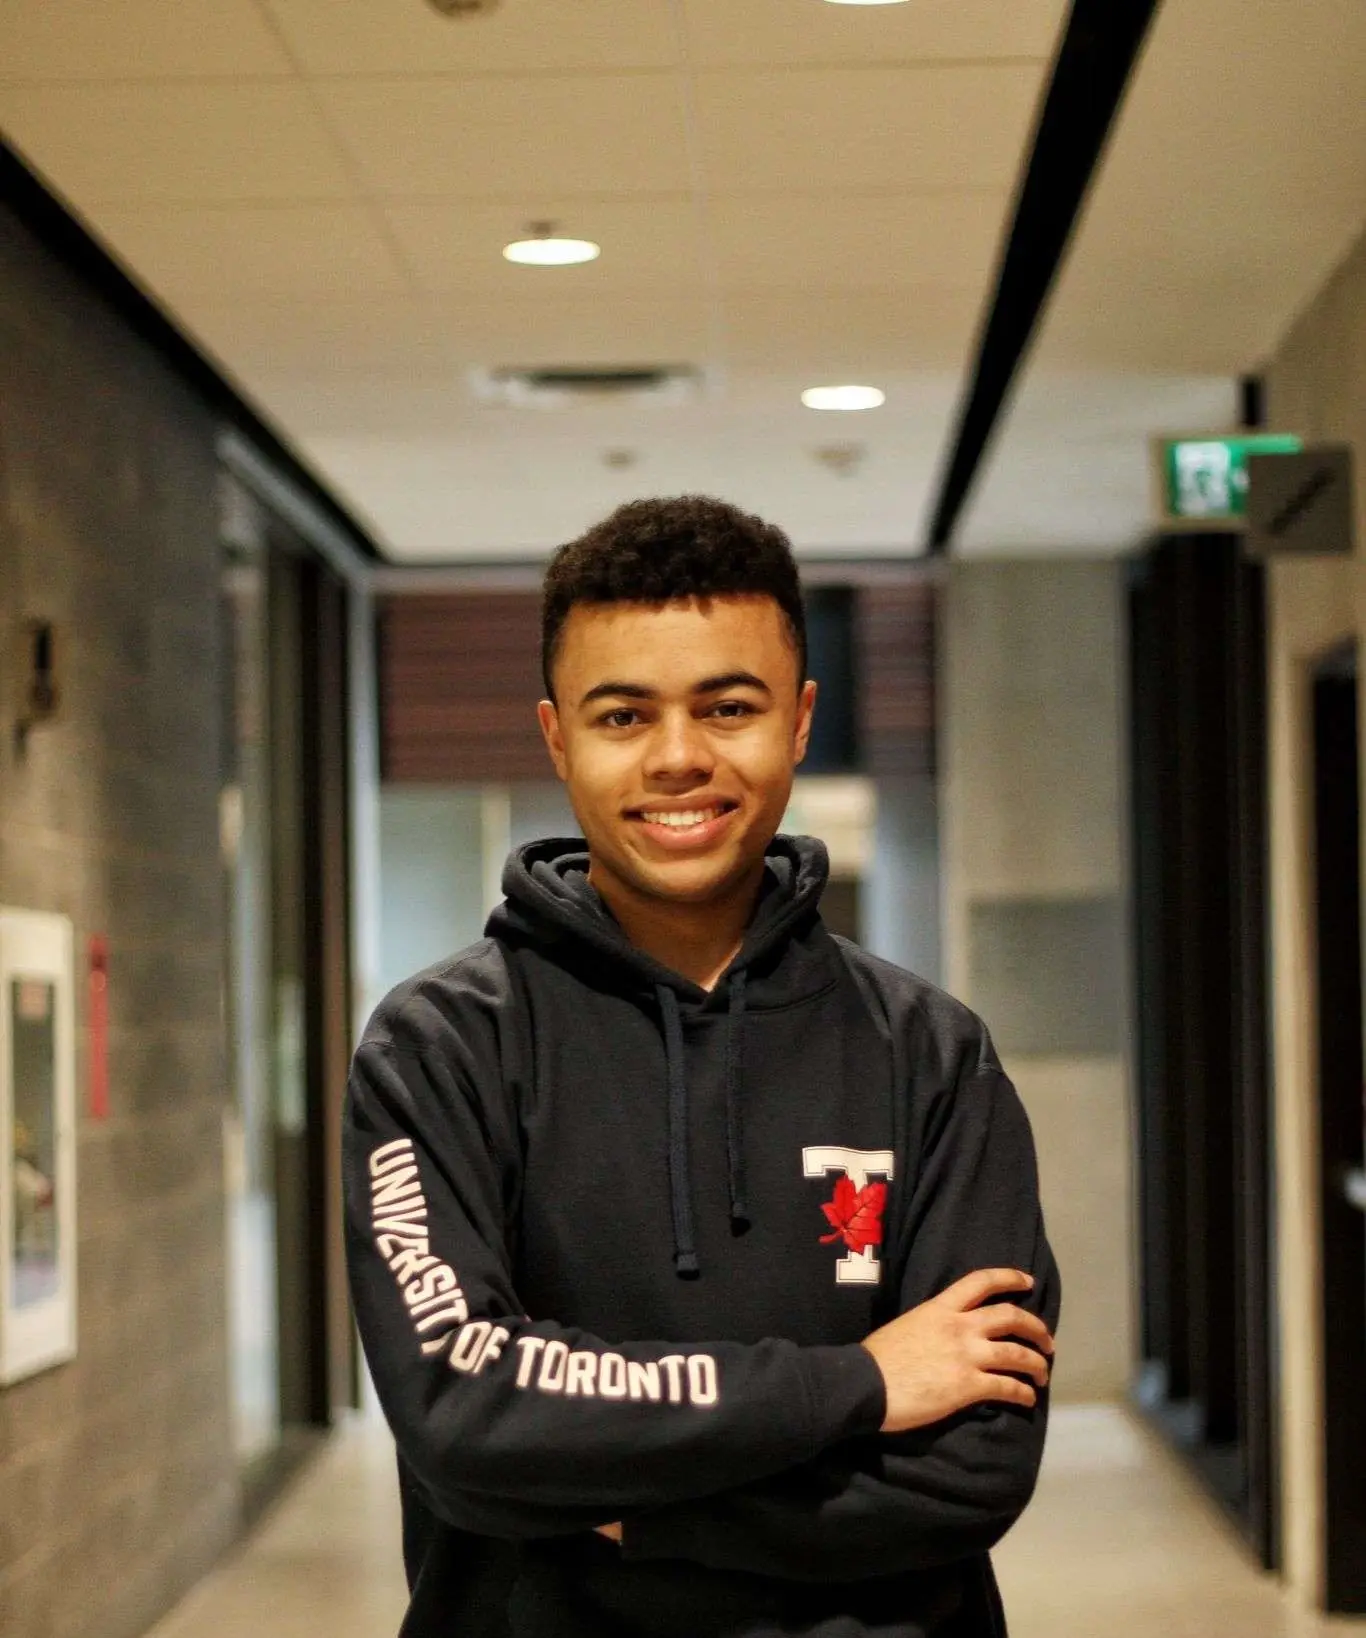 Ehab pictured in the University of Toronto wearing a UofT sweater.